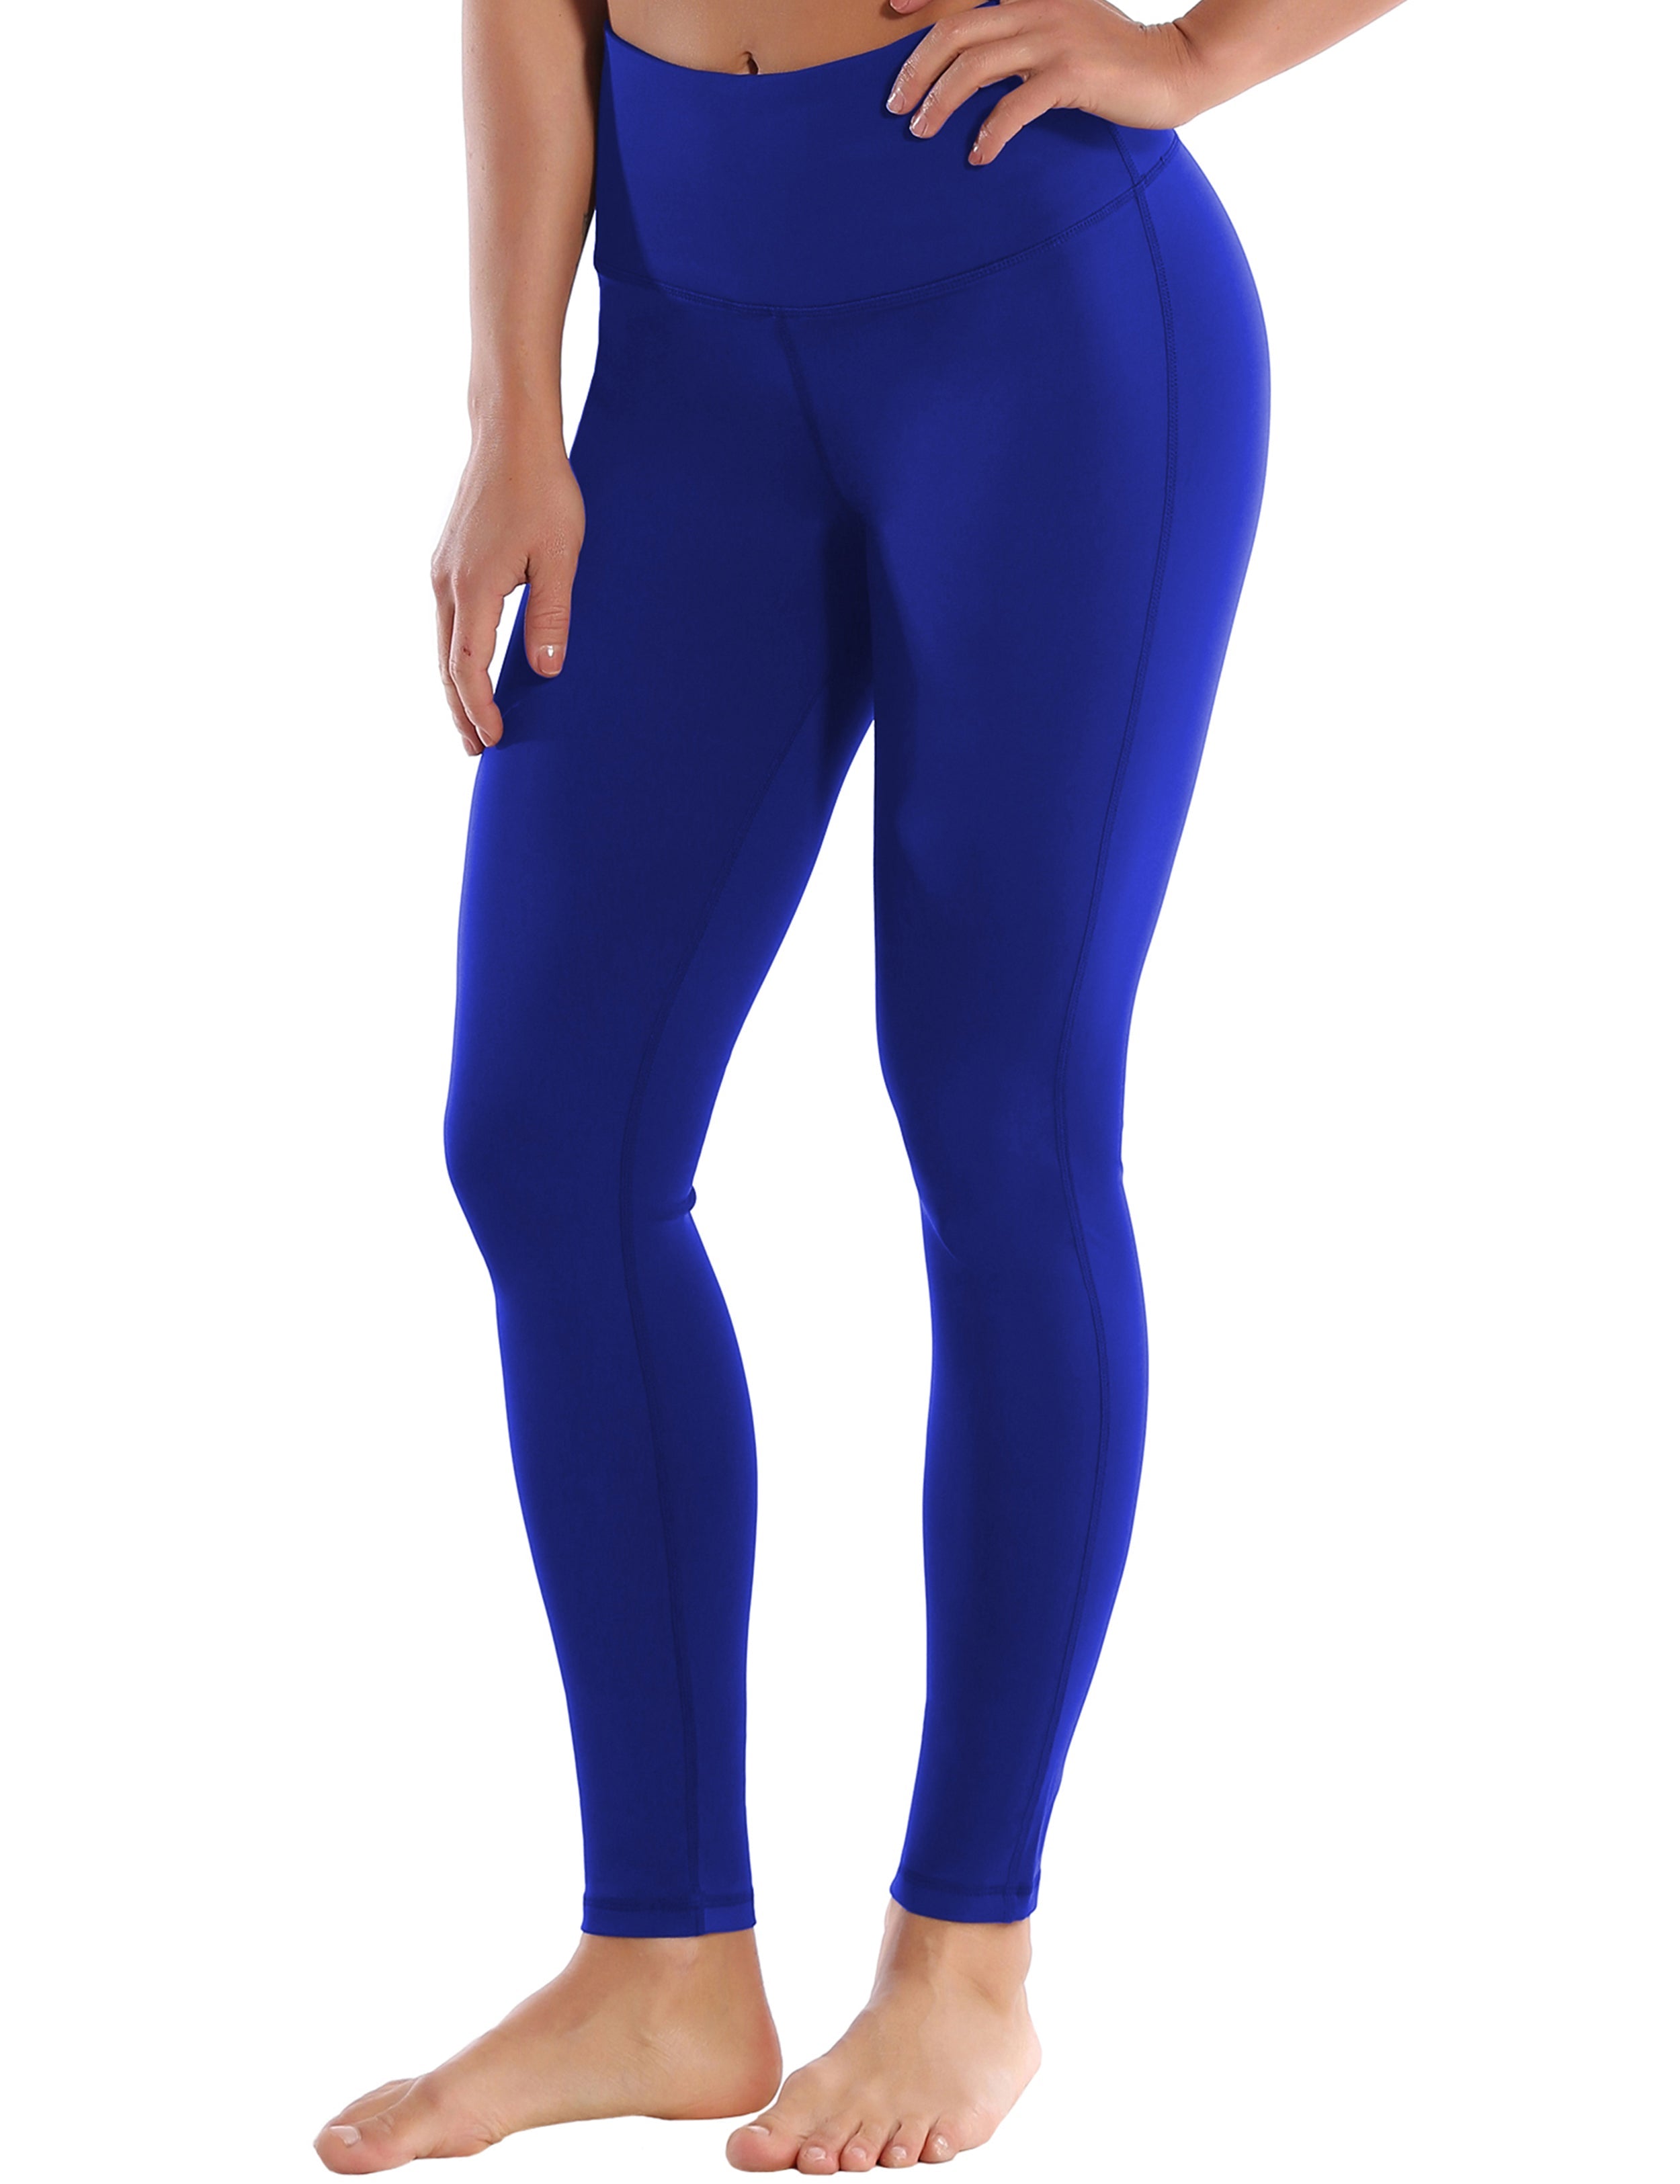 High Waist Side Line Jogging Pants navy Side Line is Make Your Legs Look Longer and Thinner 75%Nylon/25%Spandex Fabric doesn't attract lint easily 4-way stretch No see-through Moisture-wicking Tummy control Inner pocket Two lengths